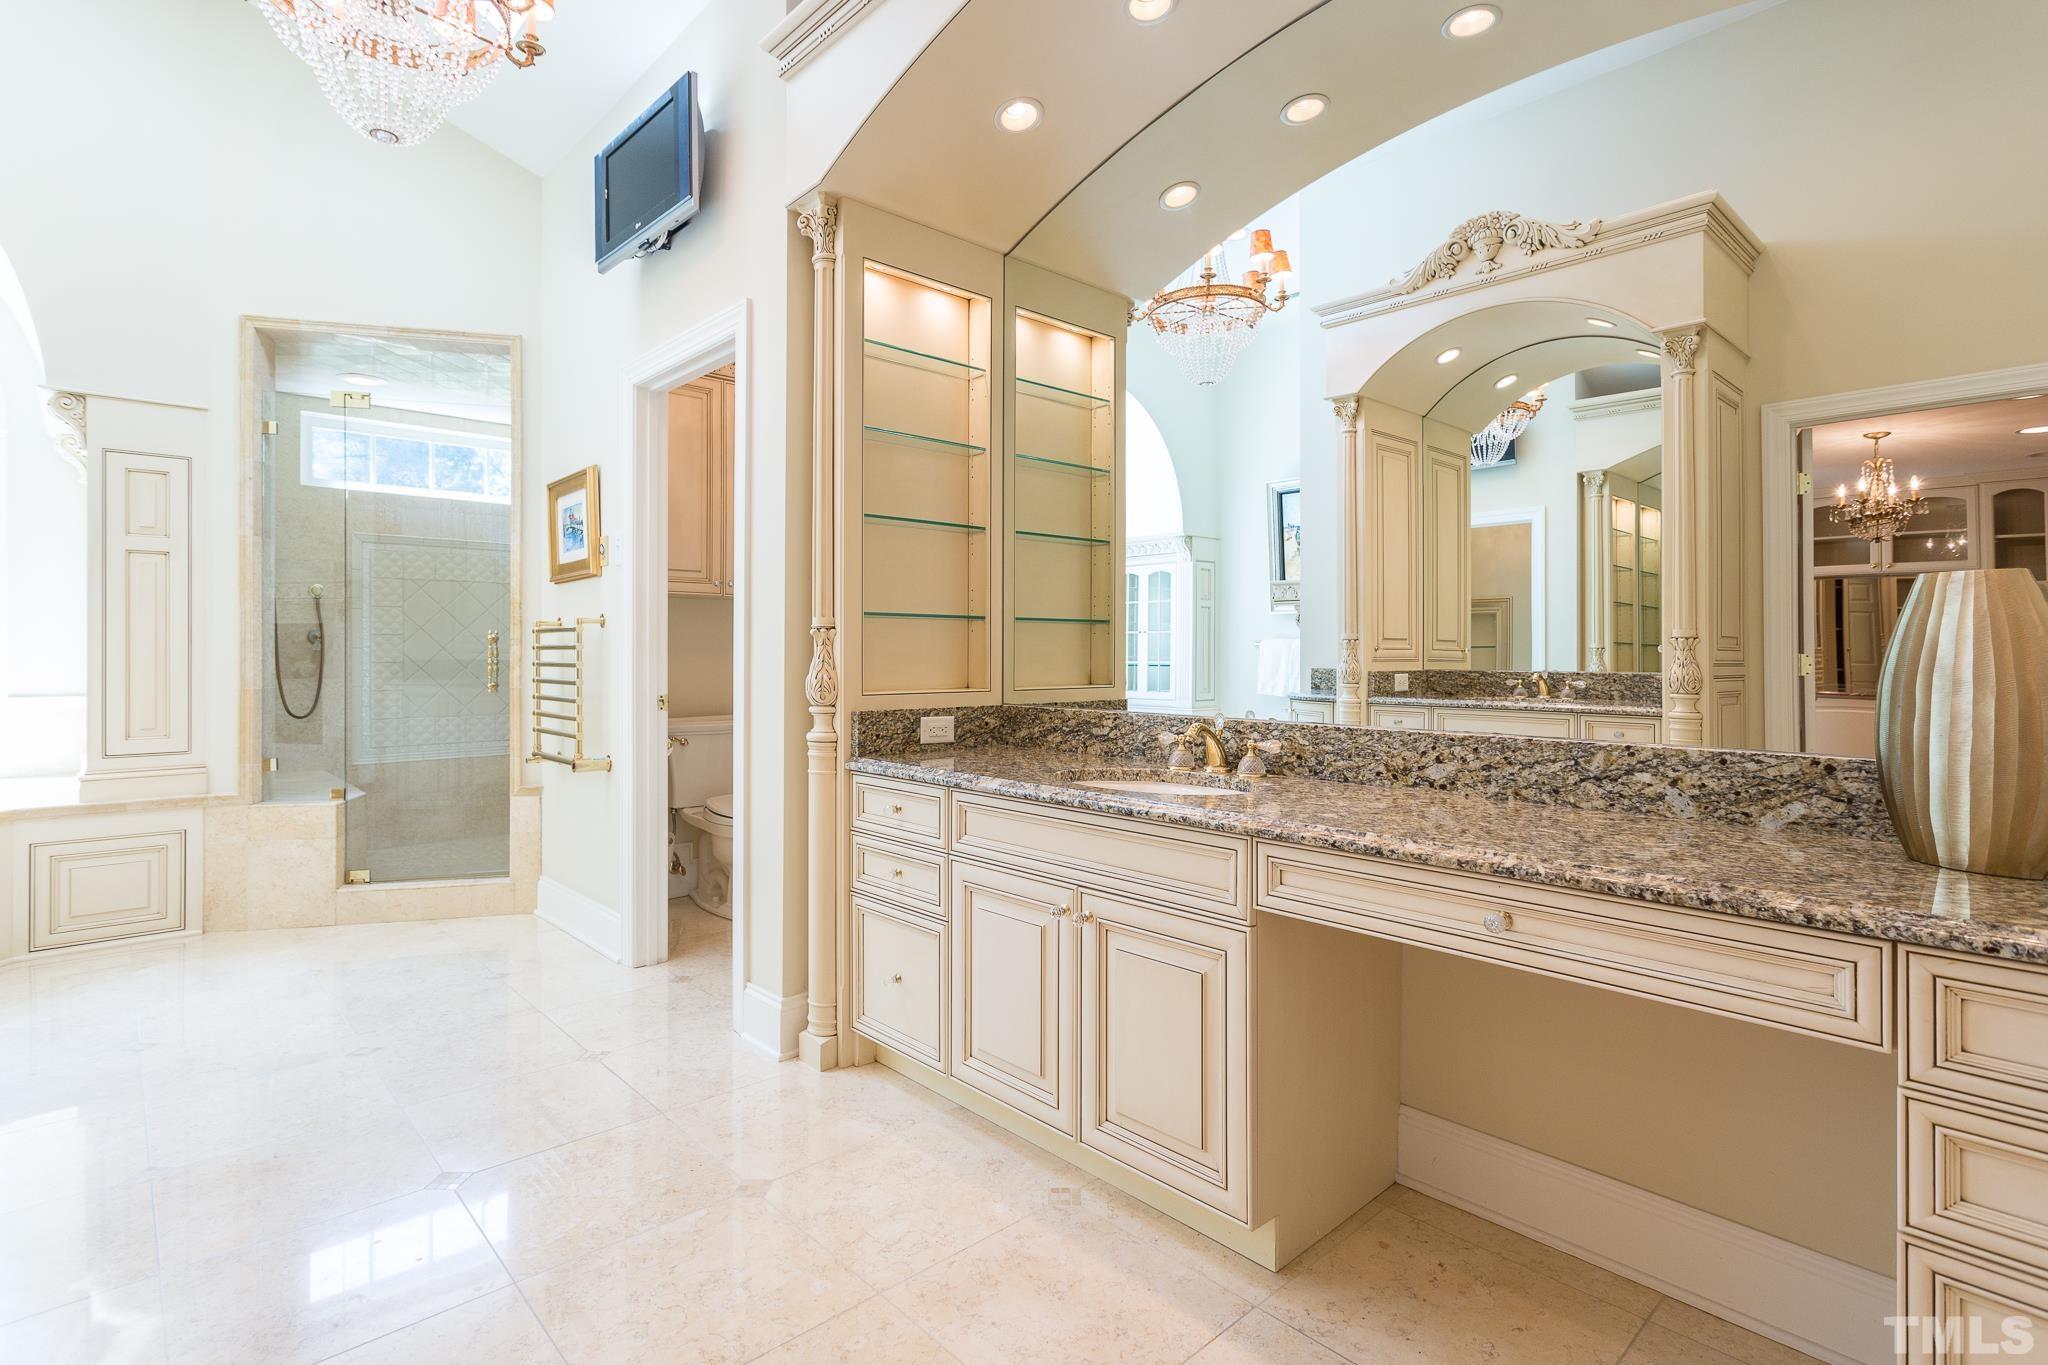 Sheer elegance abounds in the owner's suite bath as it is filled with luxurious features including programmable heated floors,heated towel rack, oversized walk-in shower w/multiple shower heads, including a rain shower head and seat ledge.